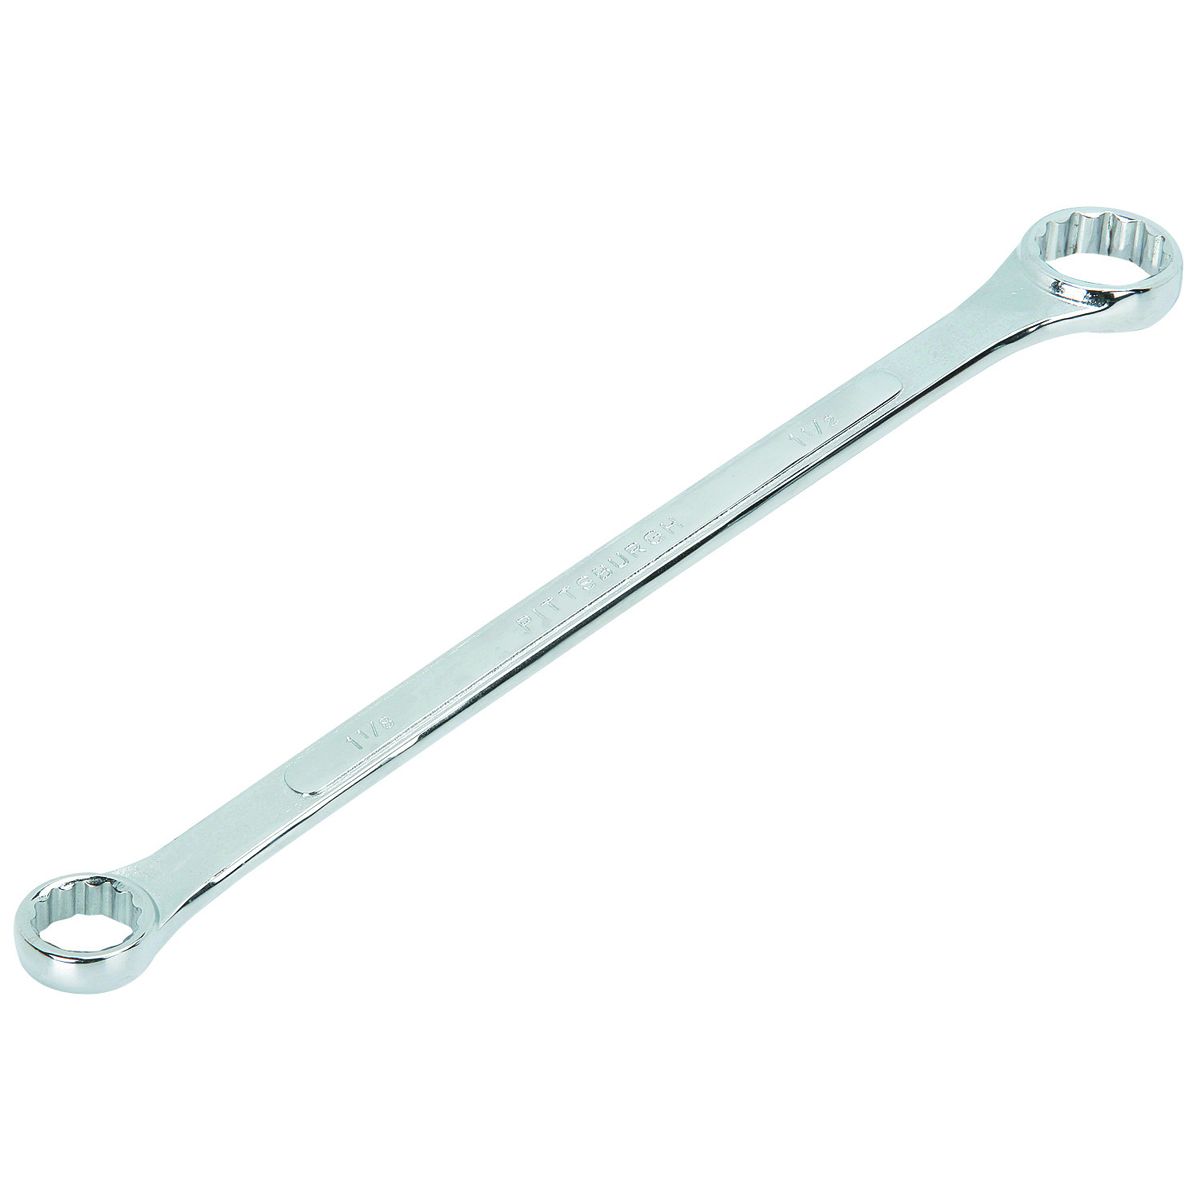 HAUL-MASTER Hitch Ball Wrench